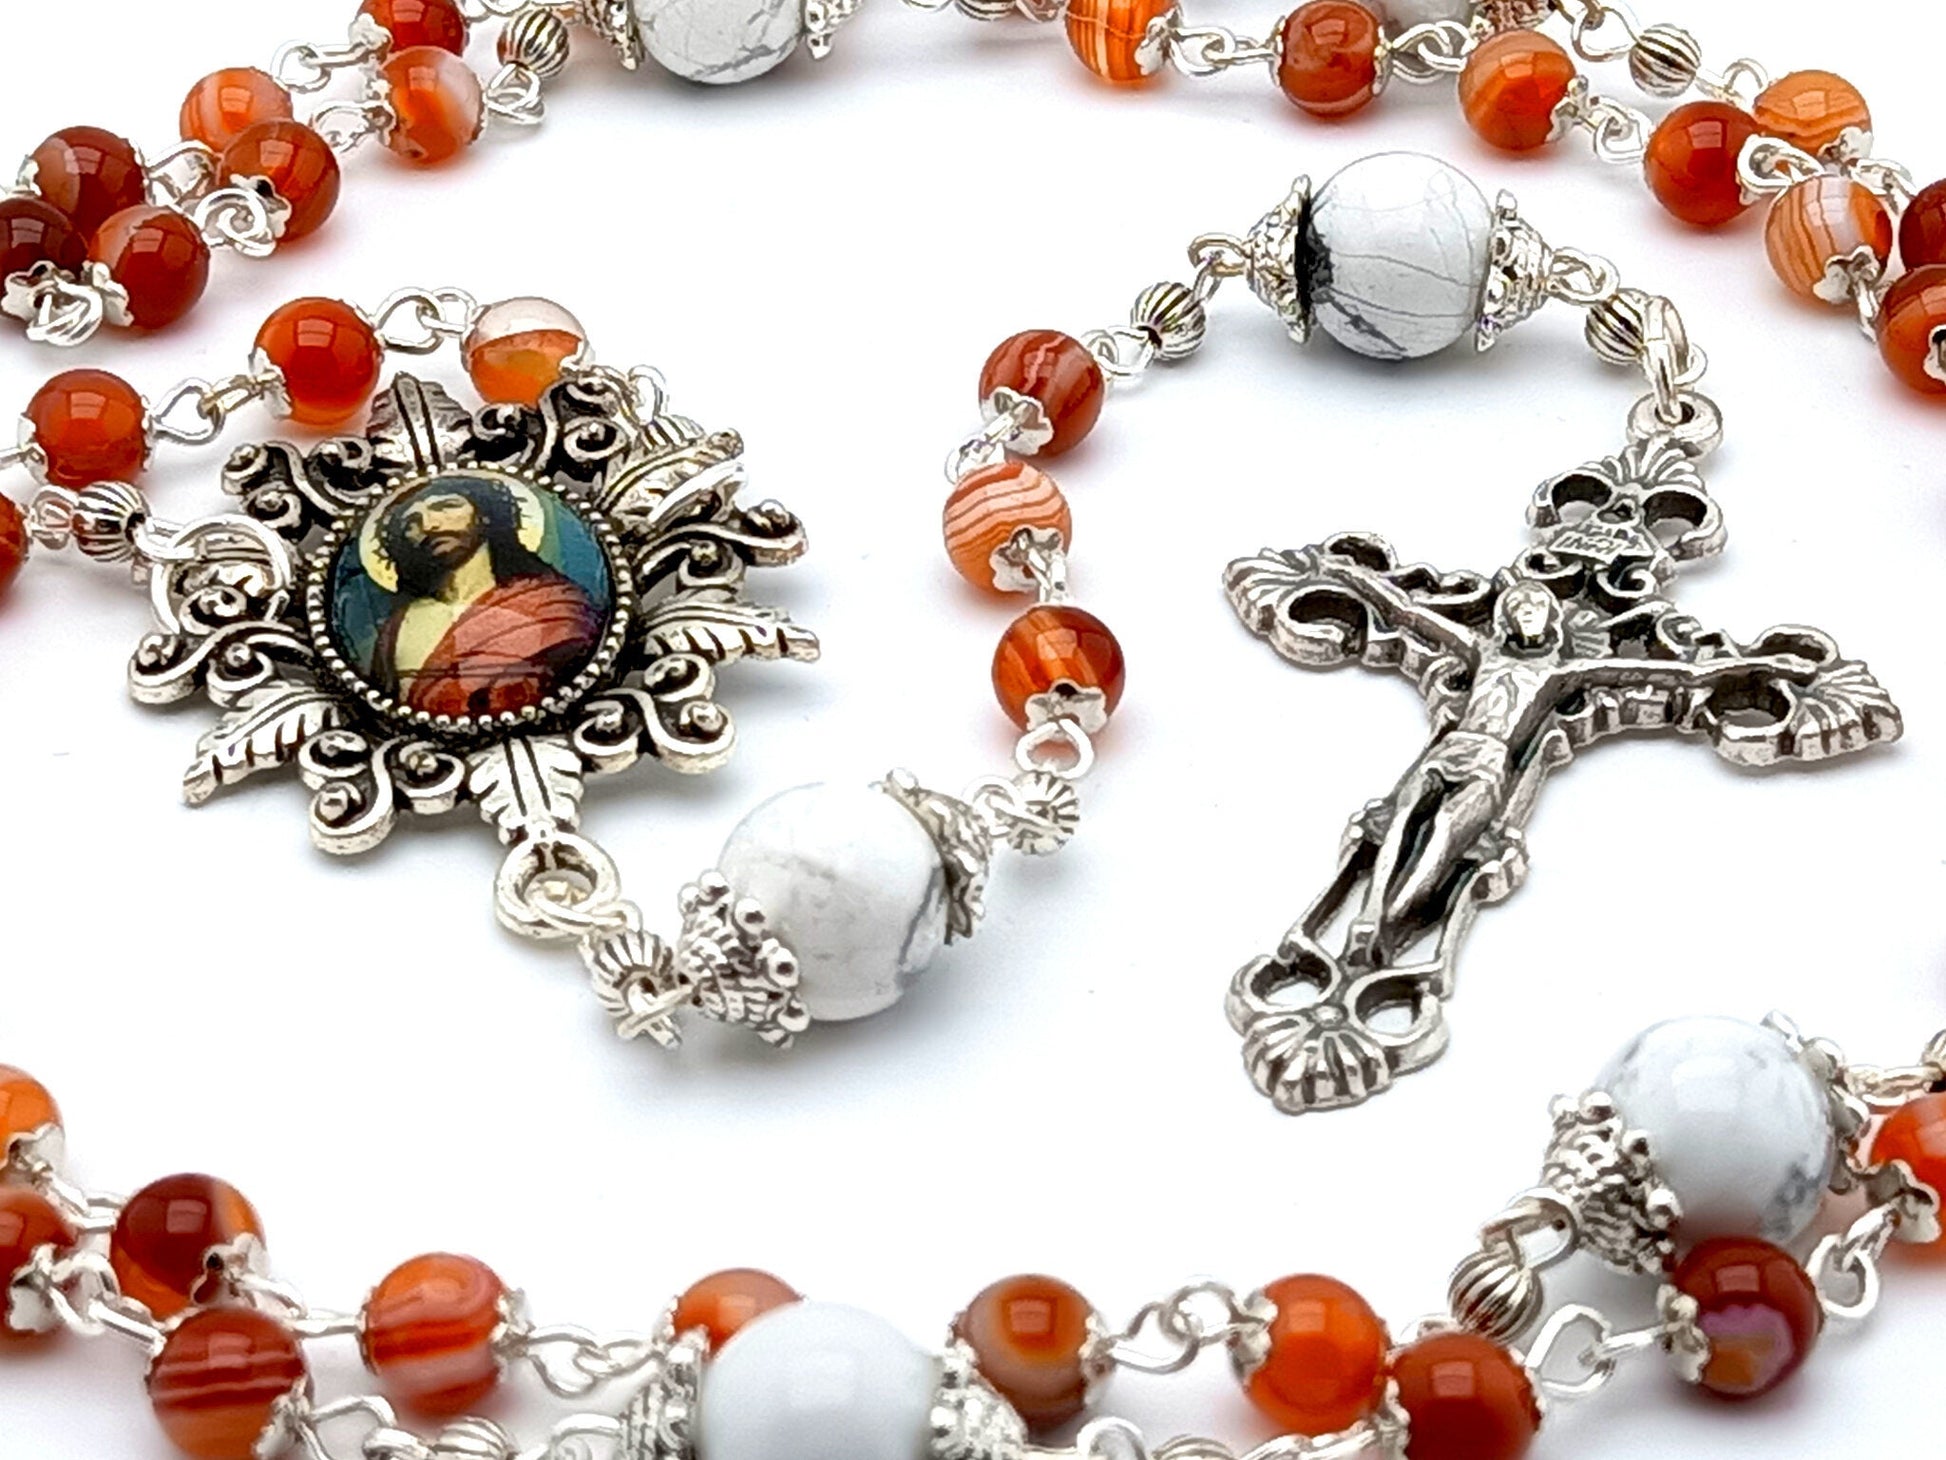 Crown of Thorns unique rosary beads with orange striped agate gemstone beads, filigree crucifix and picture centre medal.